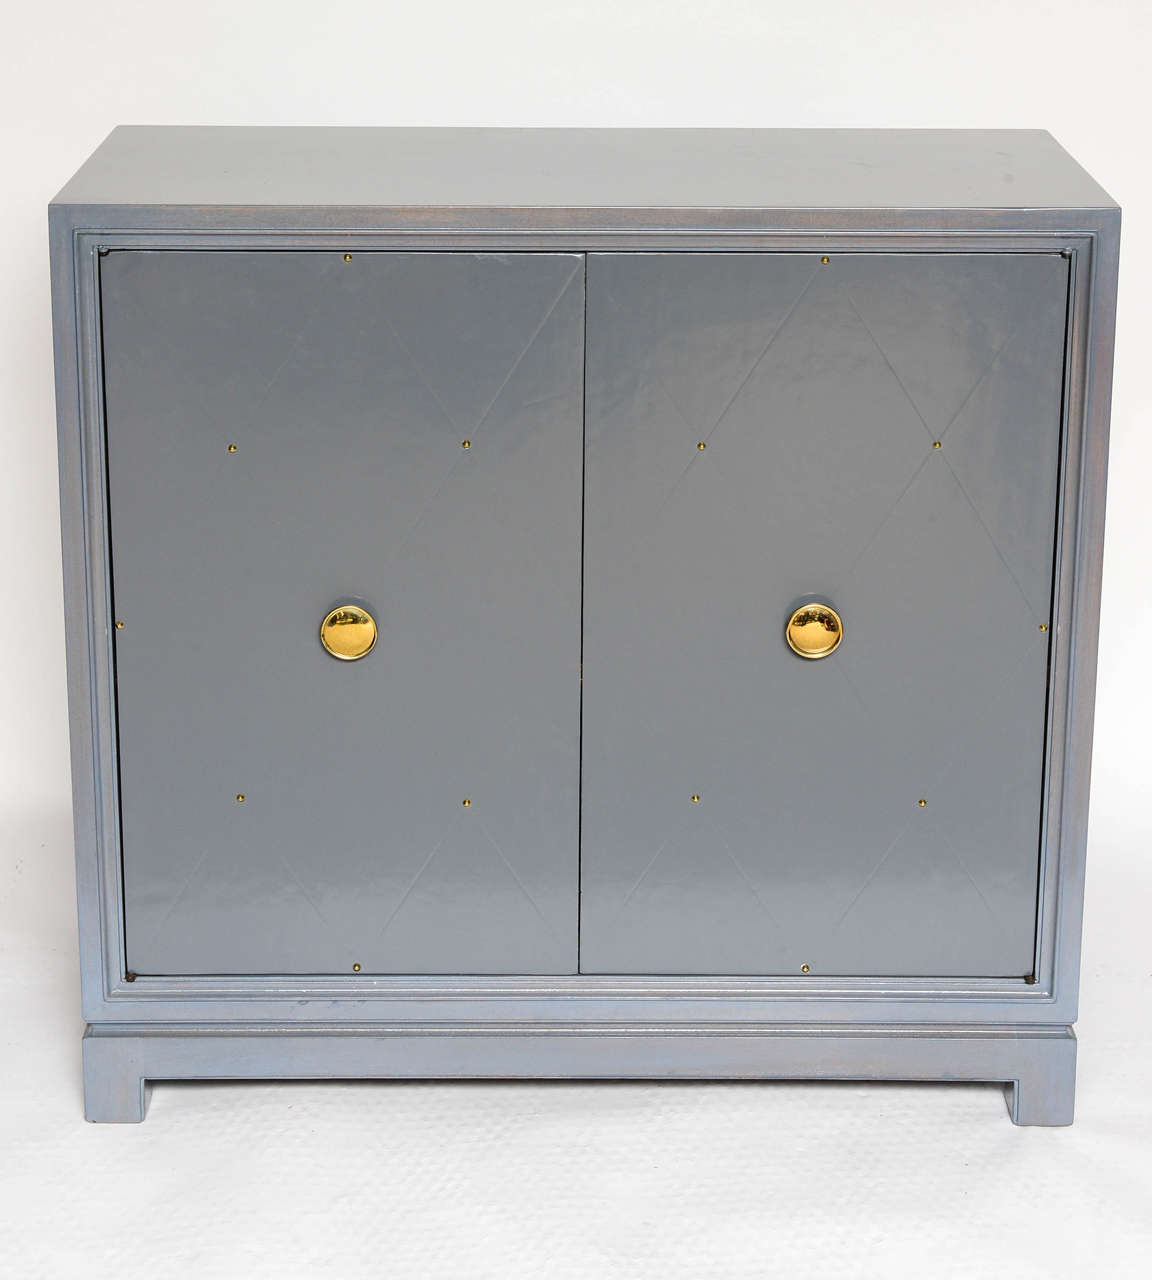 Identical from the outside, this pair contains one cabinet with shelving and one with drawers. Label to interior.